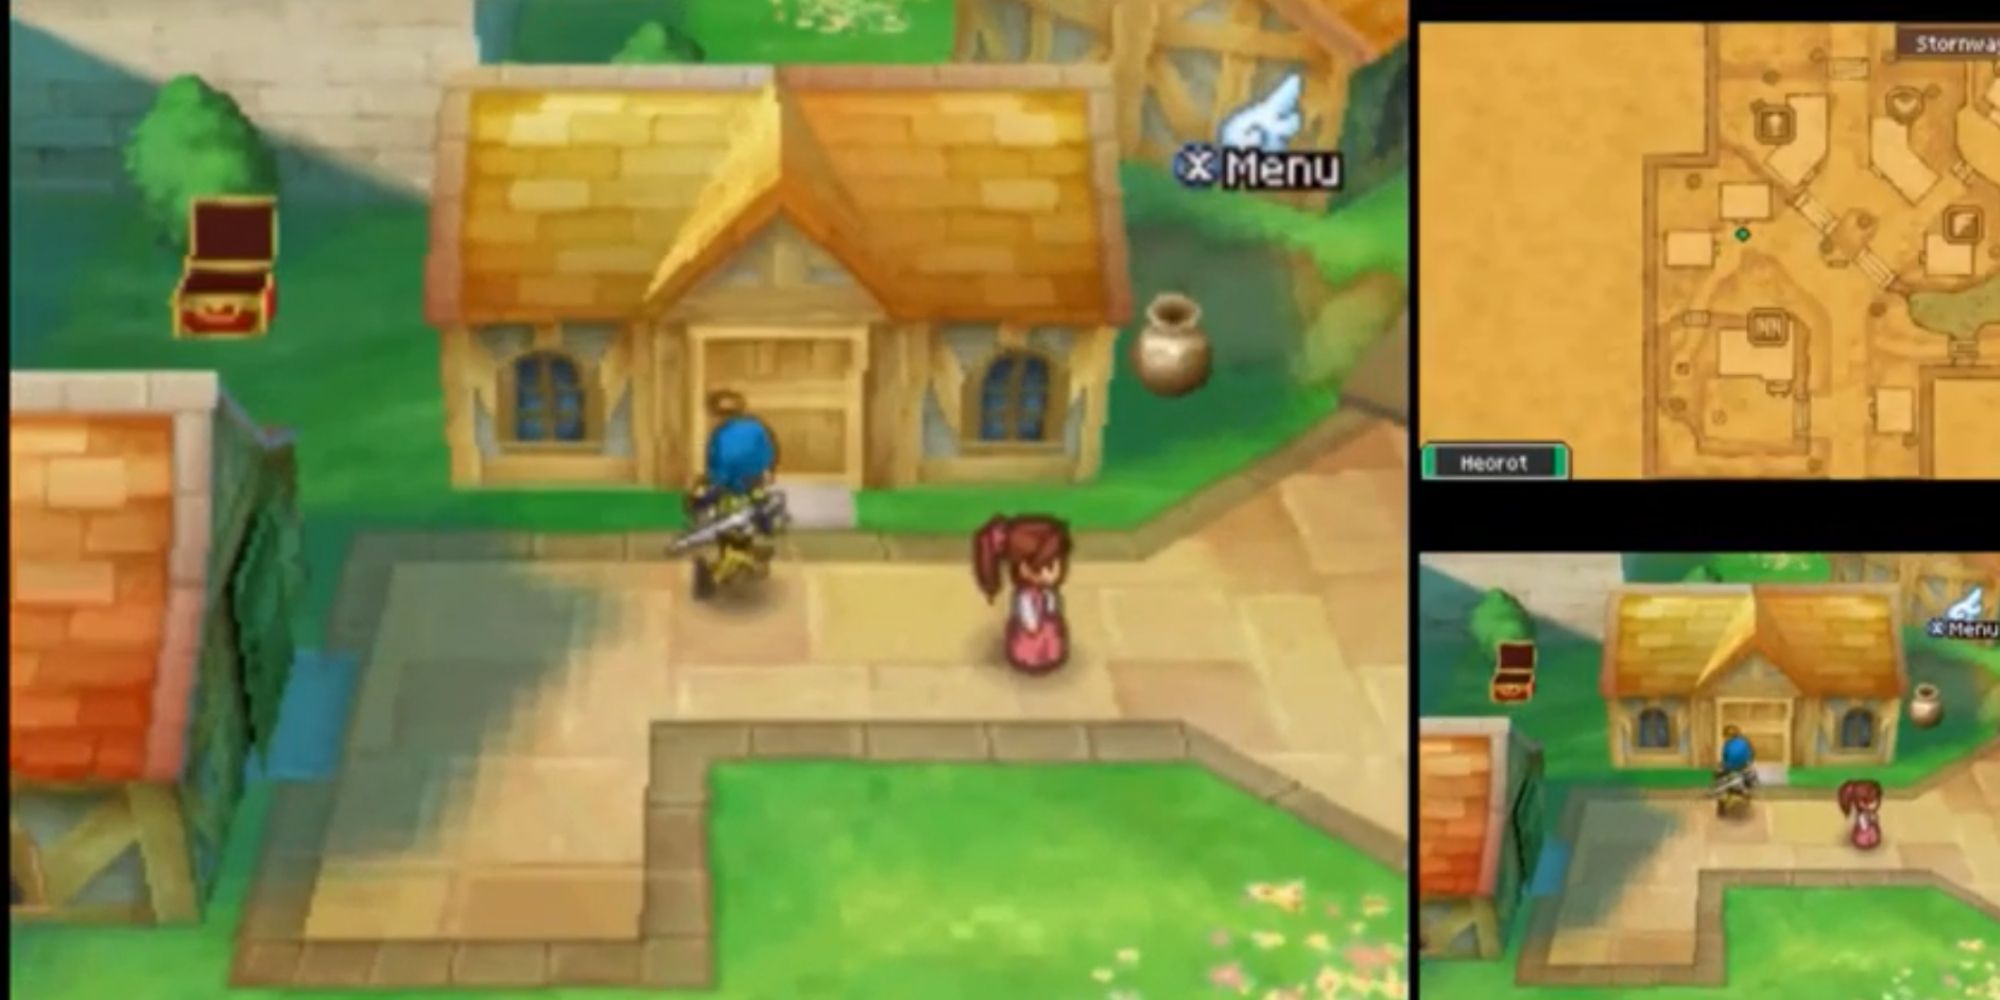 Dragon Quest Hero running into small house with an open chest nearby and a woman stood still